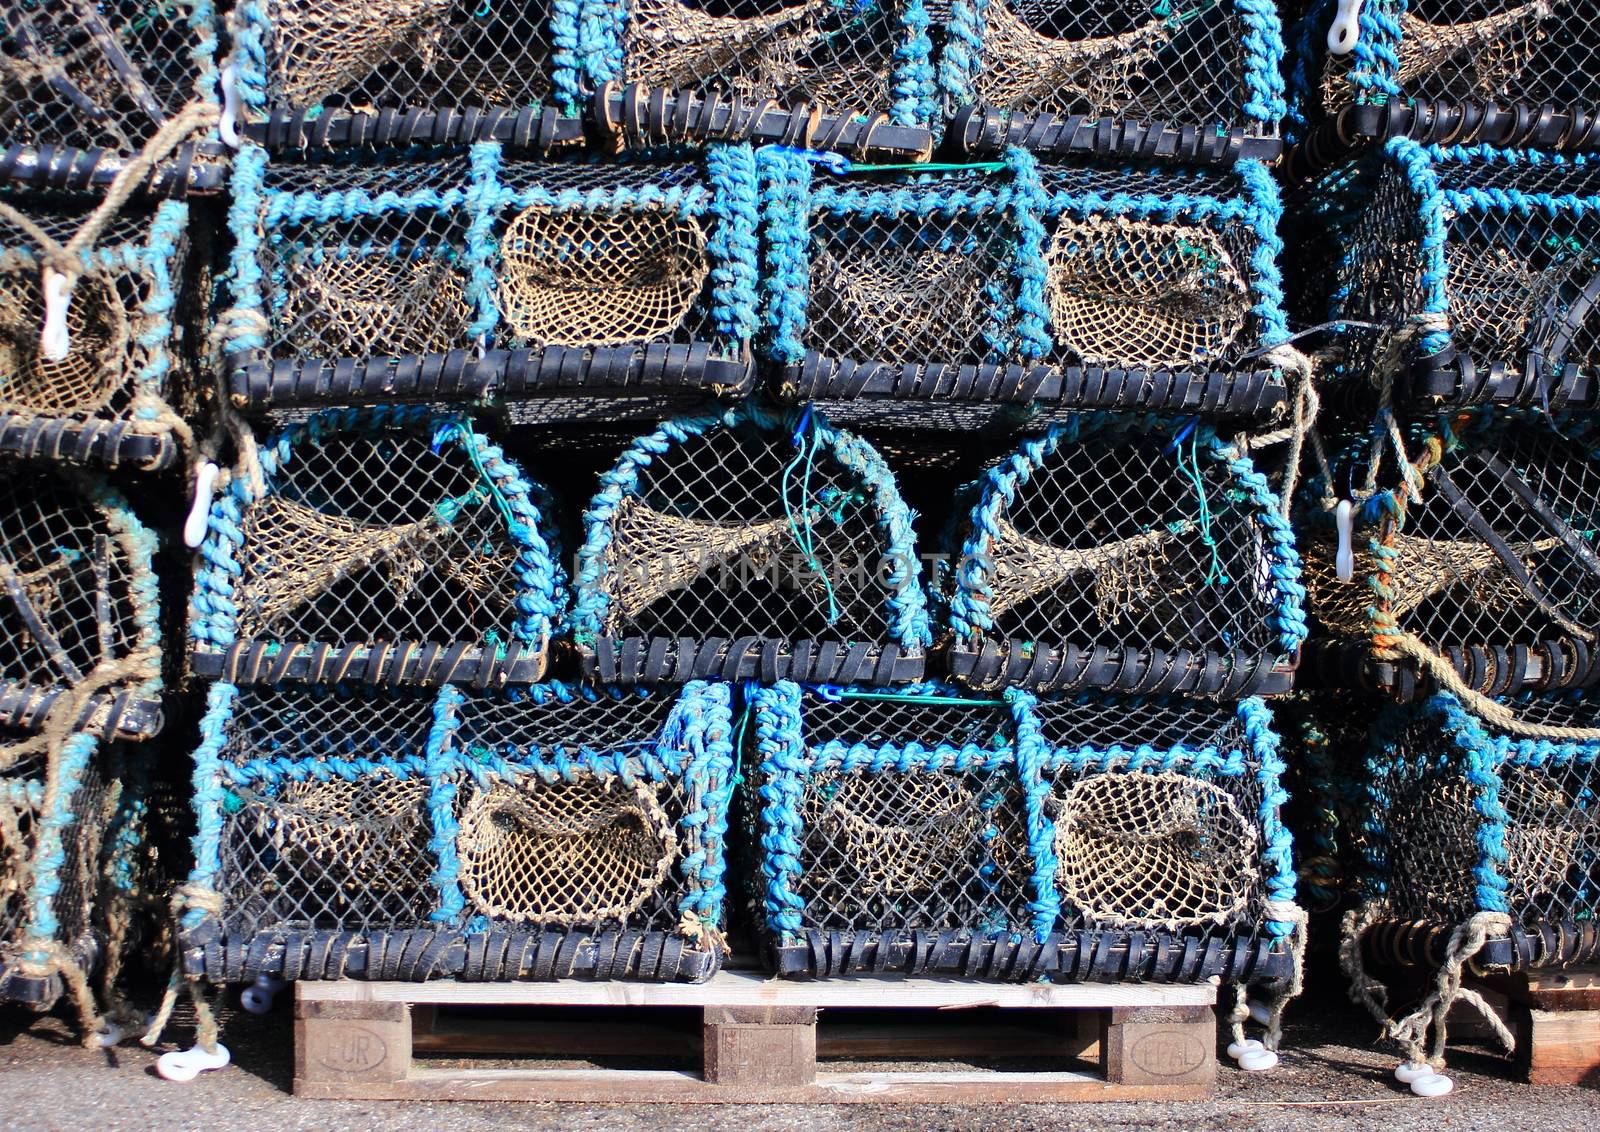 Storage of old worn fishing traps for eels